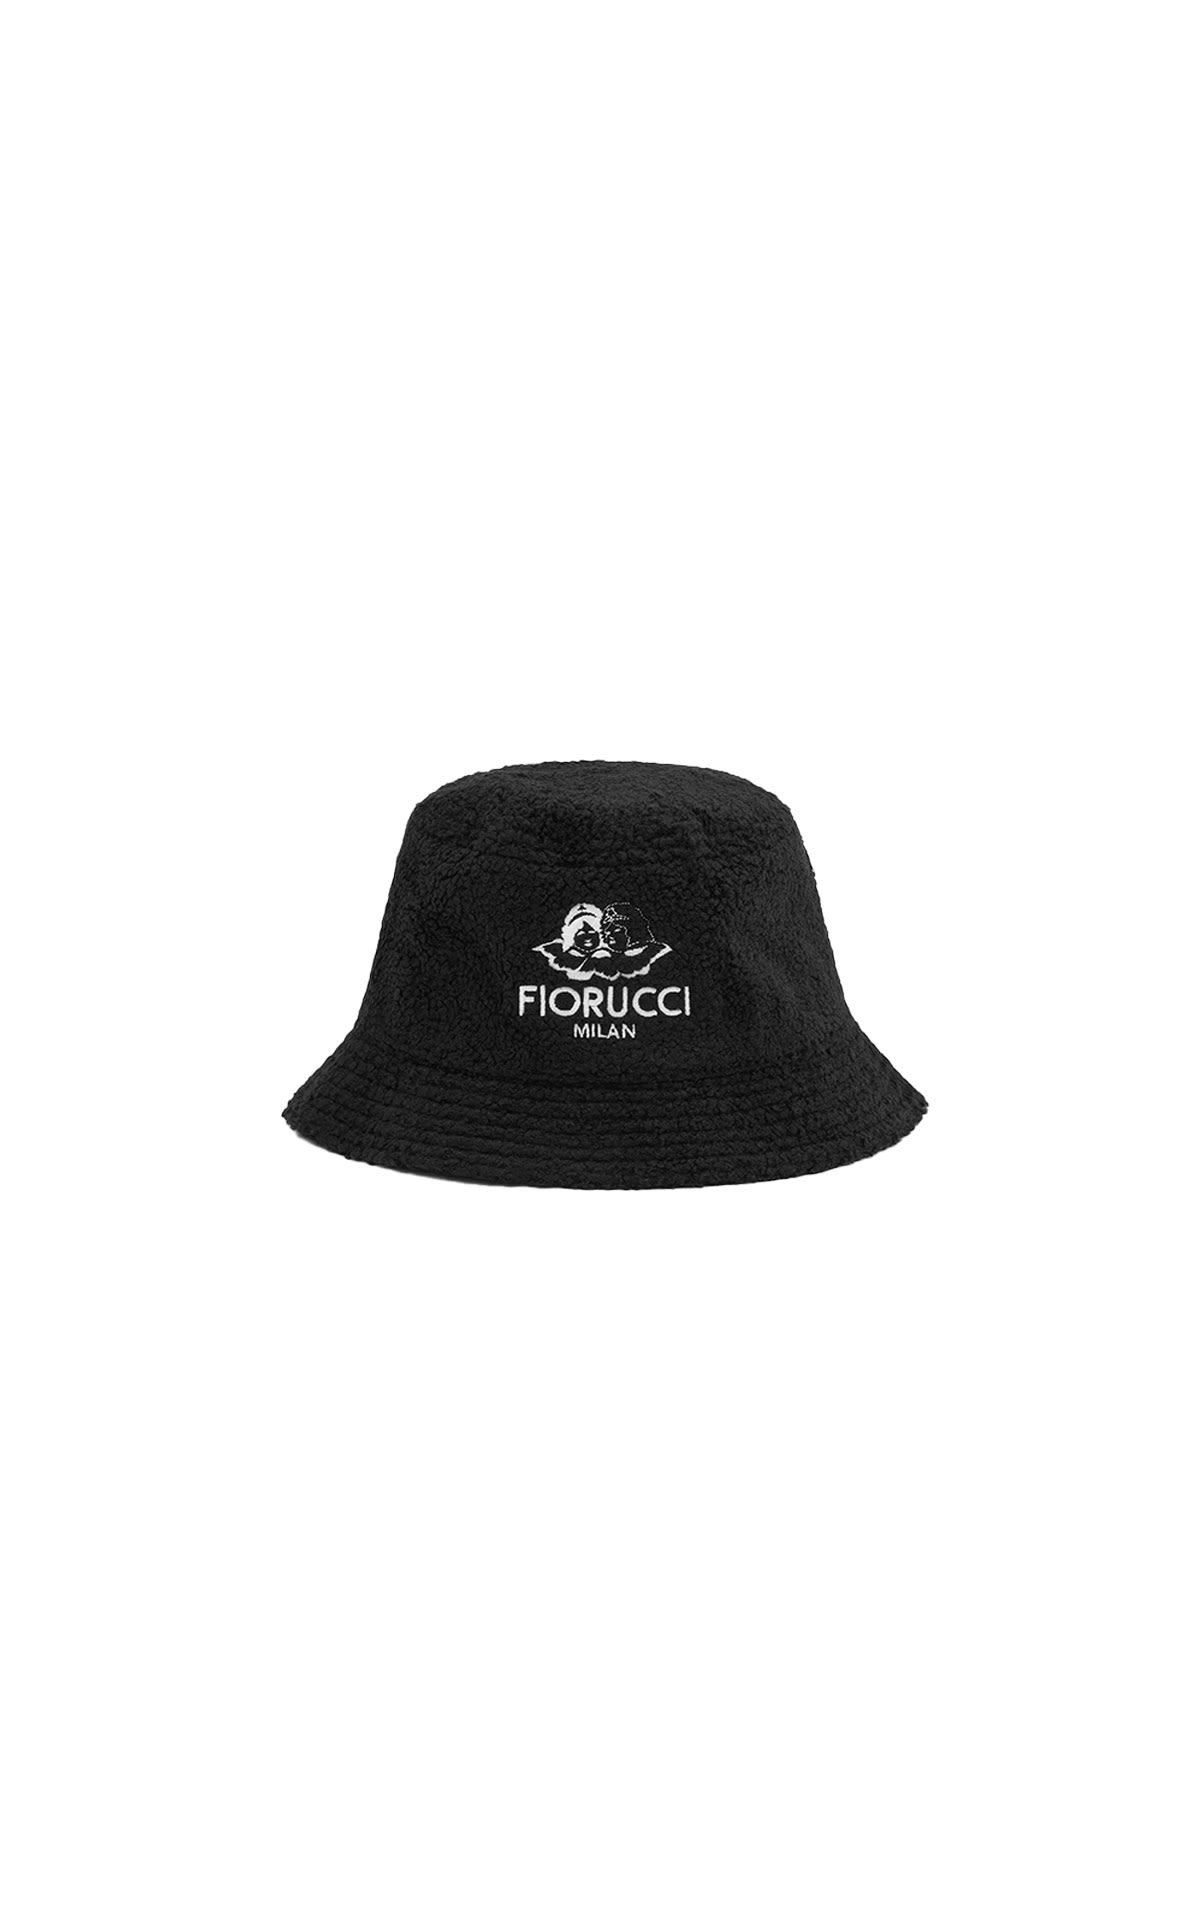 Fiorucci Milan angels shearling bucket hat from Bicester Village